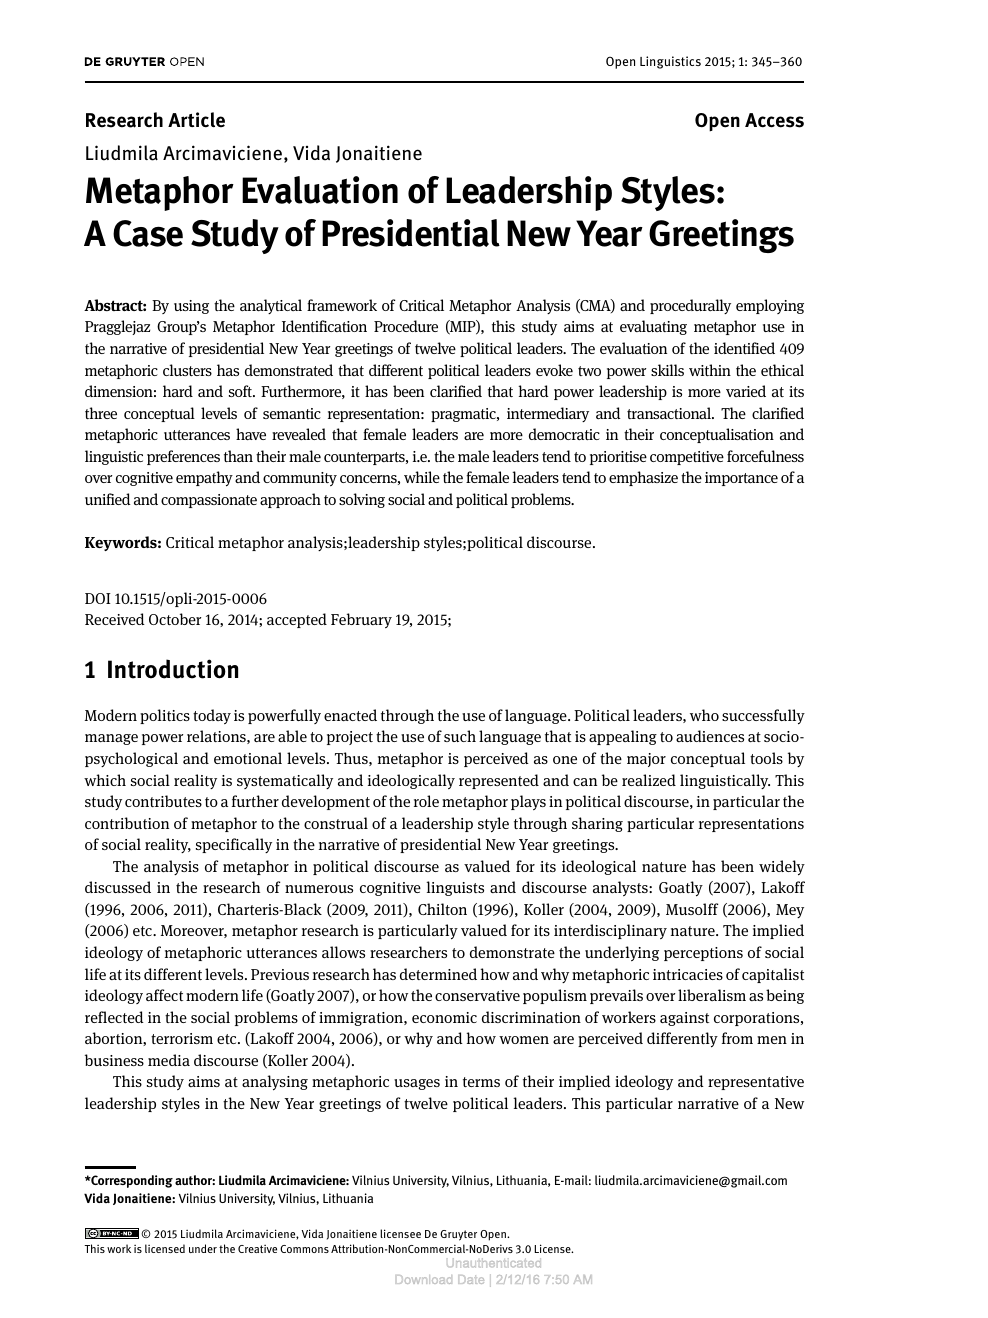 research paper on leadership styles